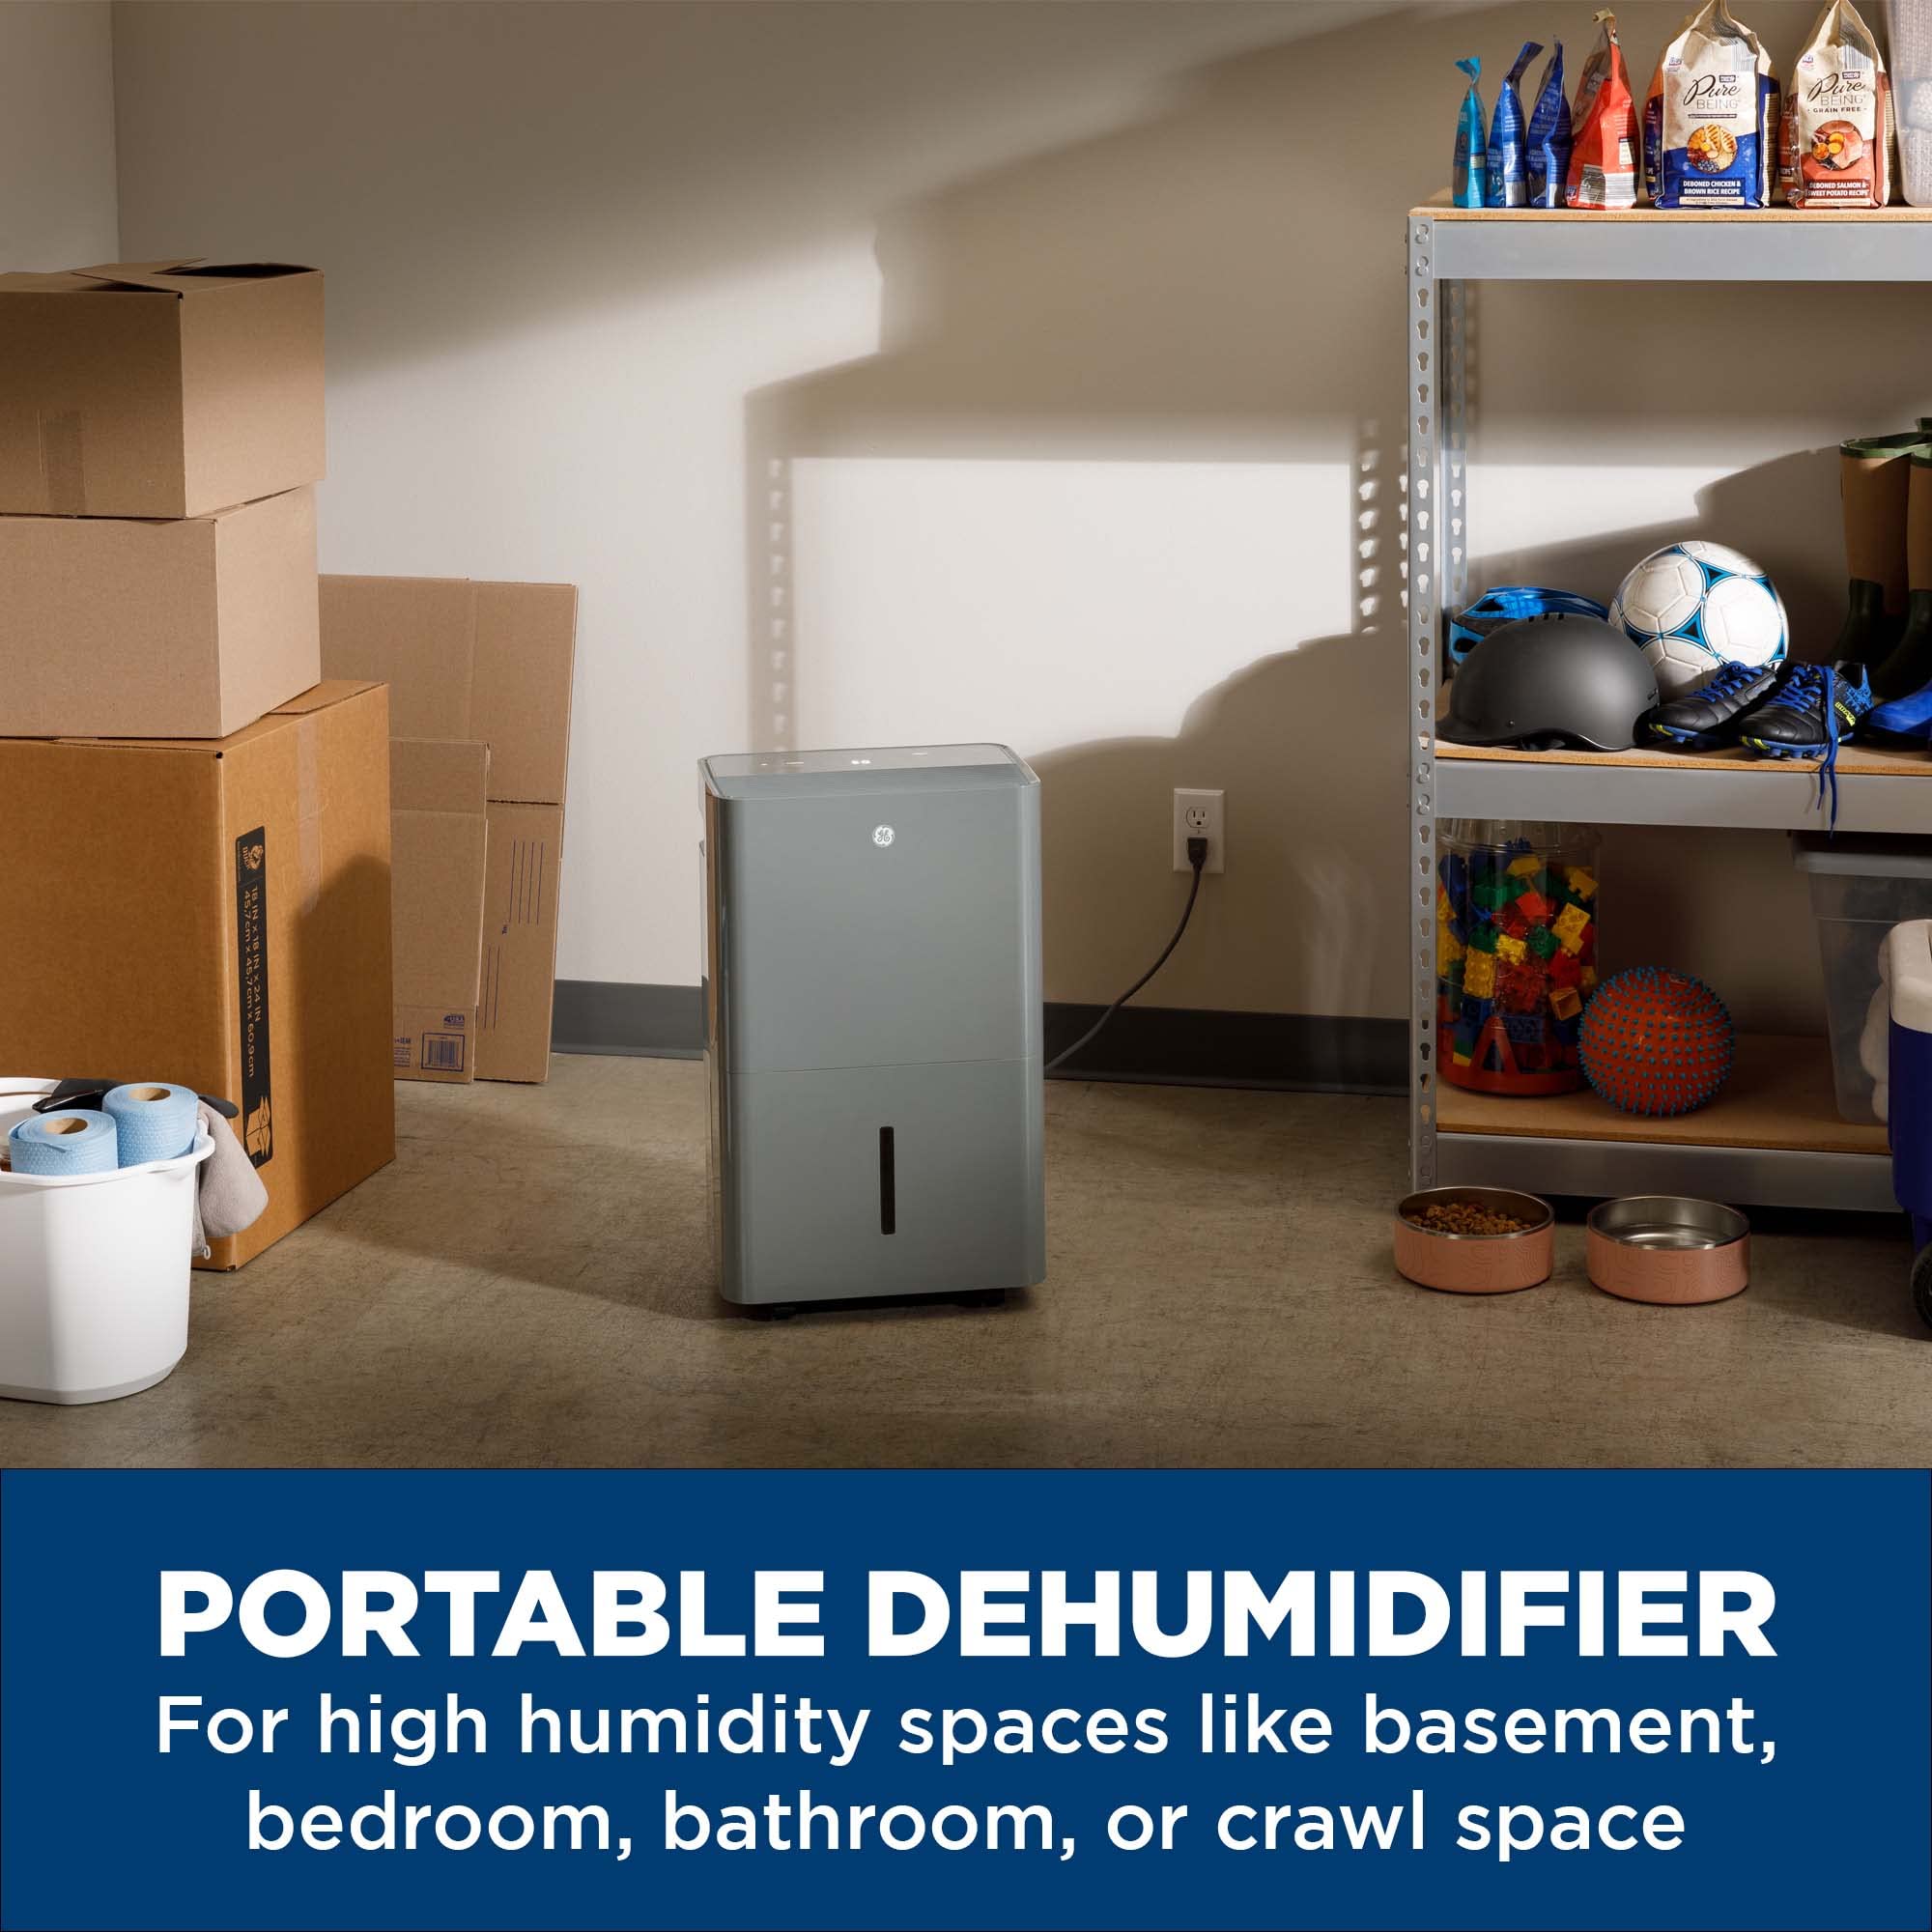 GE Energy Star Portable Dehumidifier for Basement, Bedroom, Bathroom, Garage or Large Rooms up to 4500 Sq Ft, 50 Pint with Removable Bucket and Continuous Drain Connect for Auto or Manual Drainage